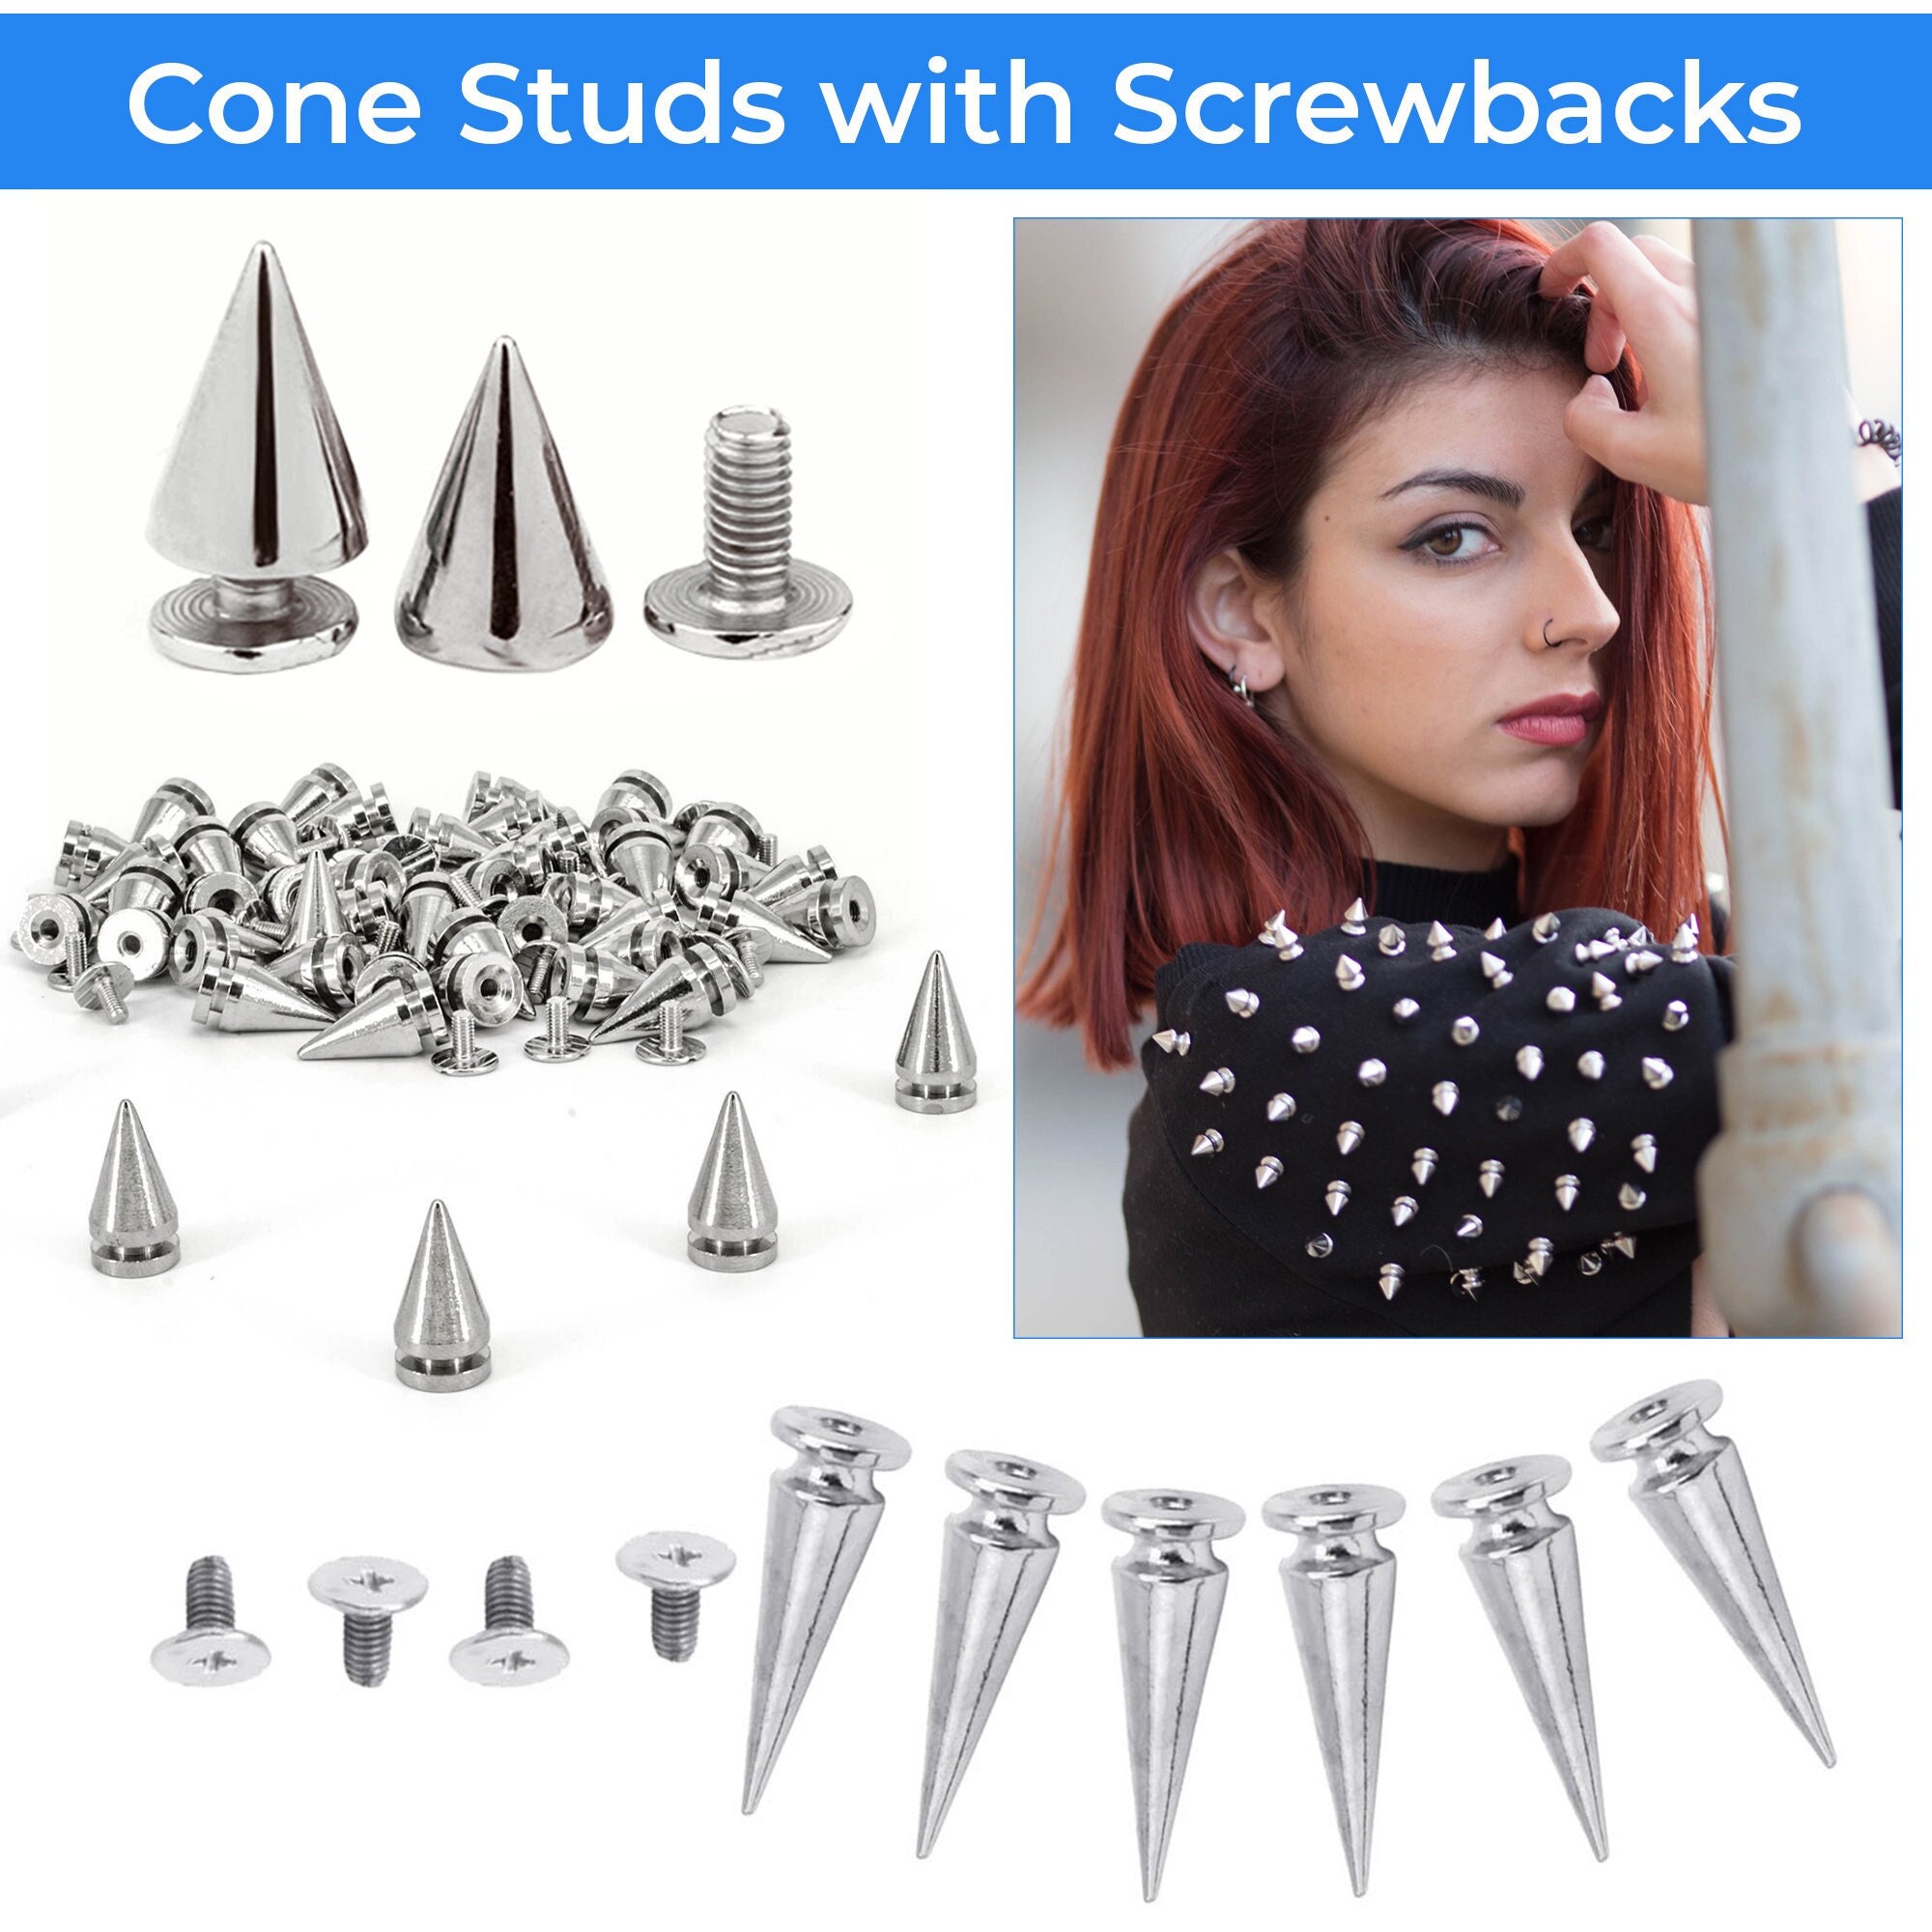 Punk Spikes And Studs, 60 Pcs Metal Punk Studs, Bullet Cone Spikes For  Clothing Shoes Leather Belts Bag Accessories Diy, 2 Size